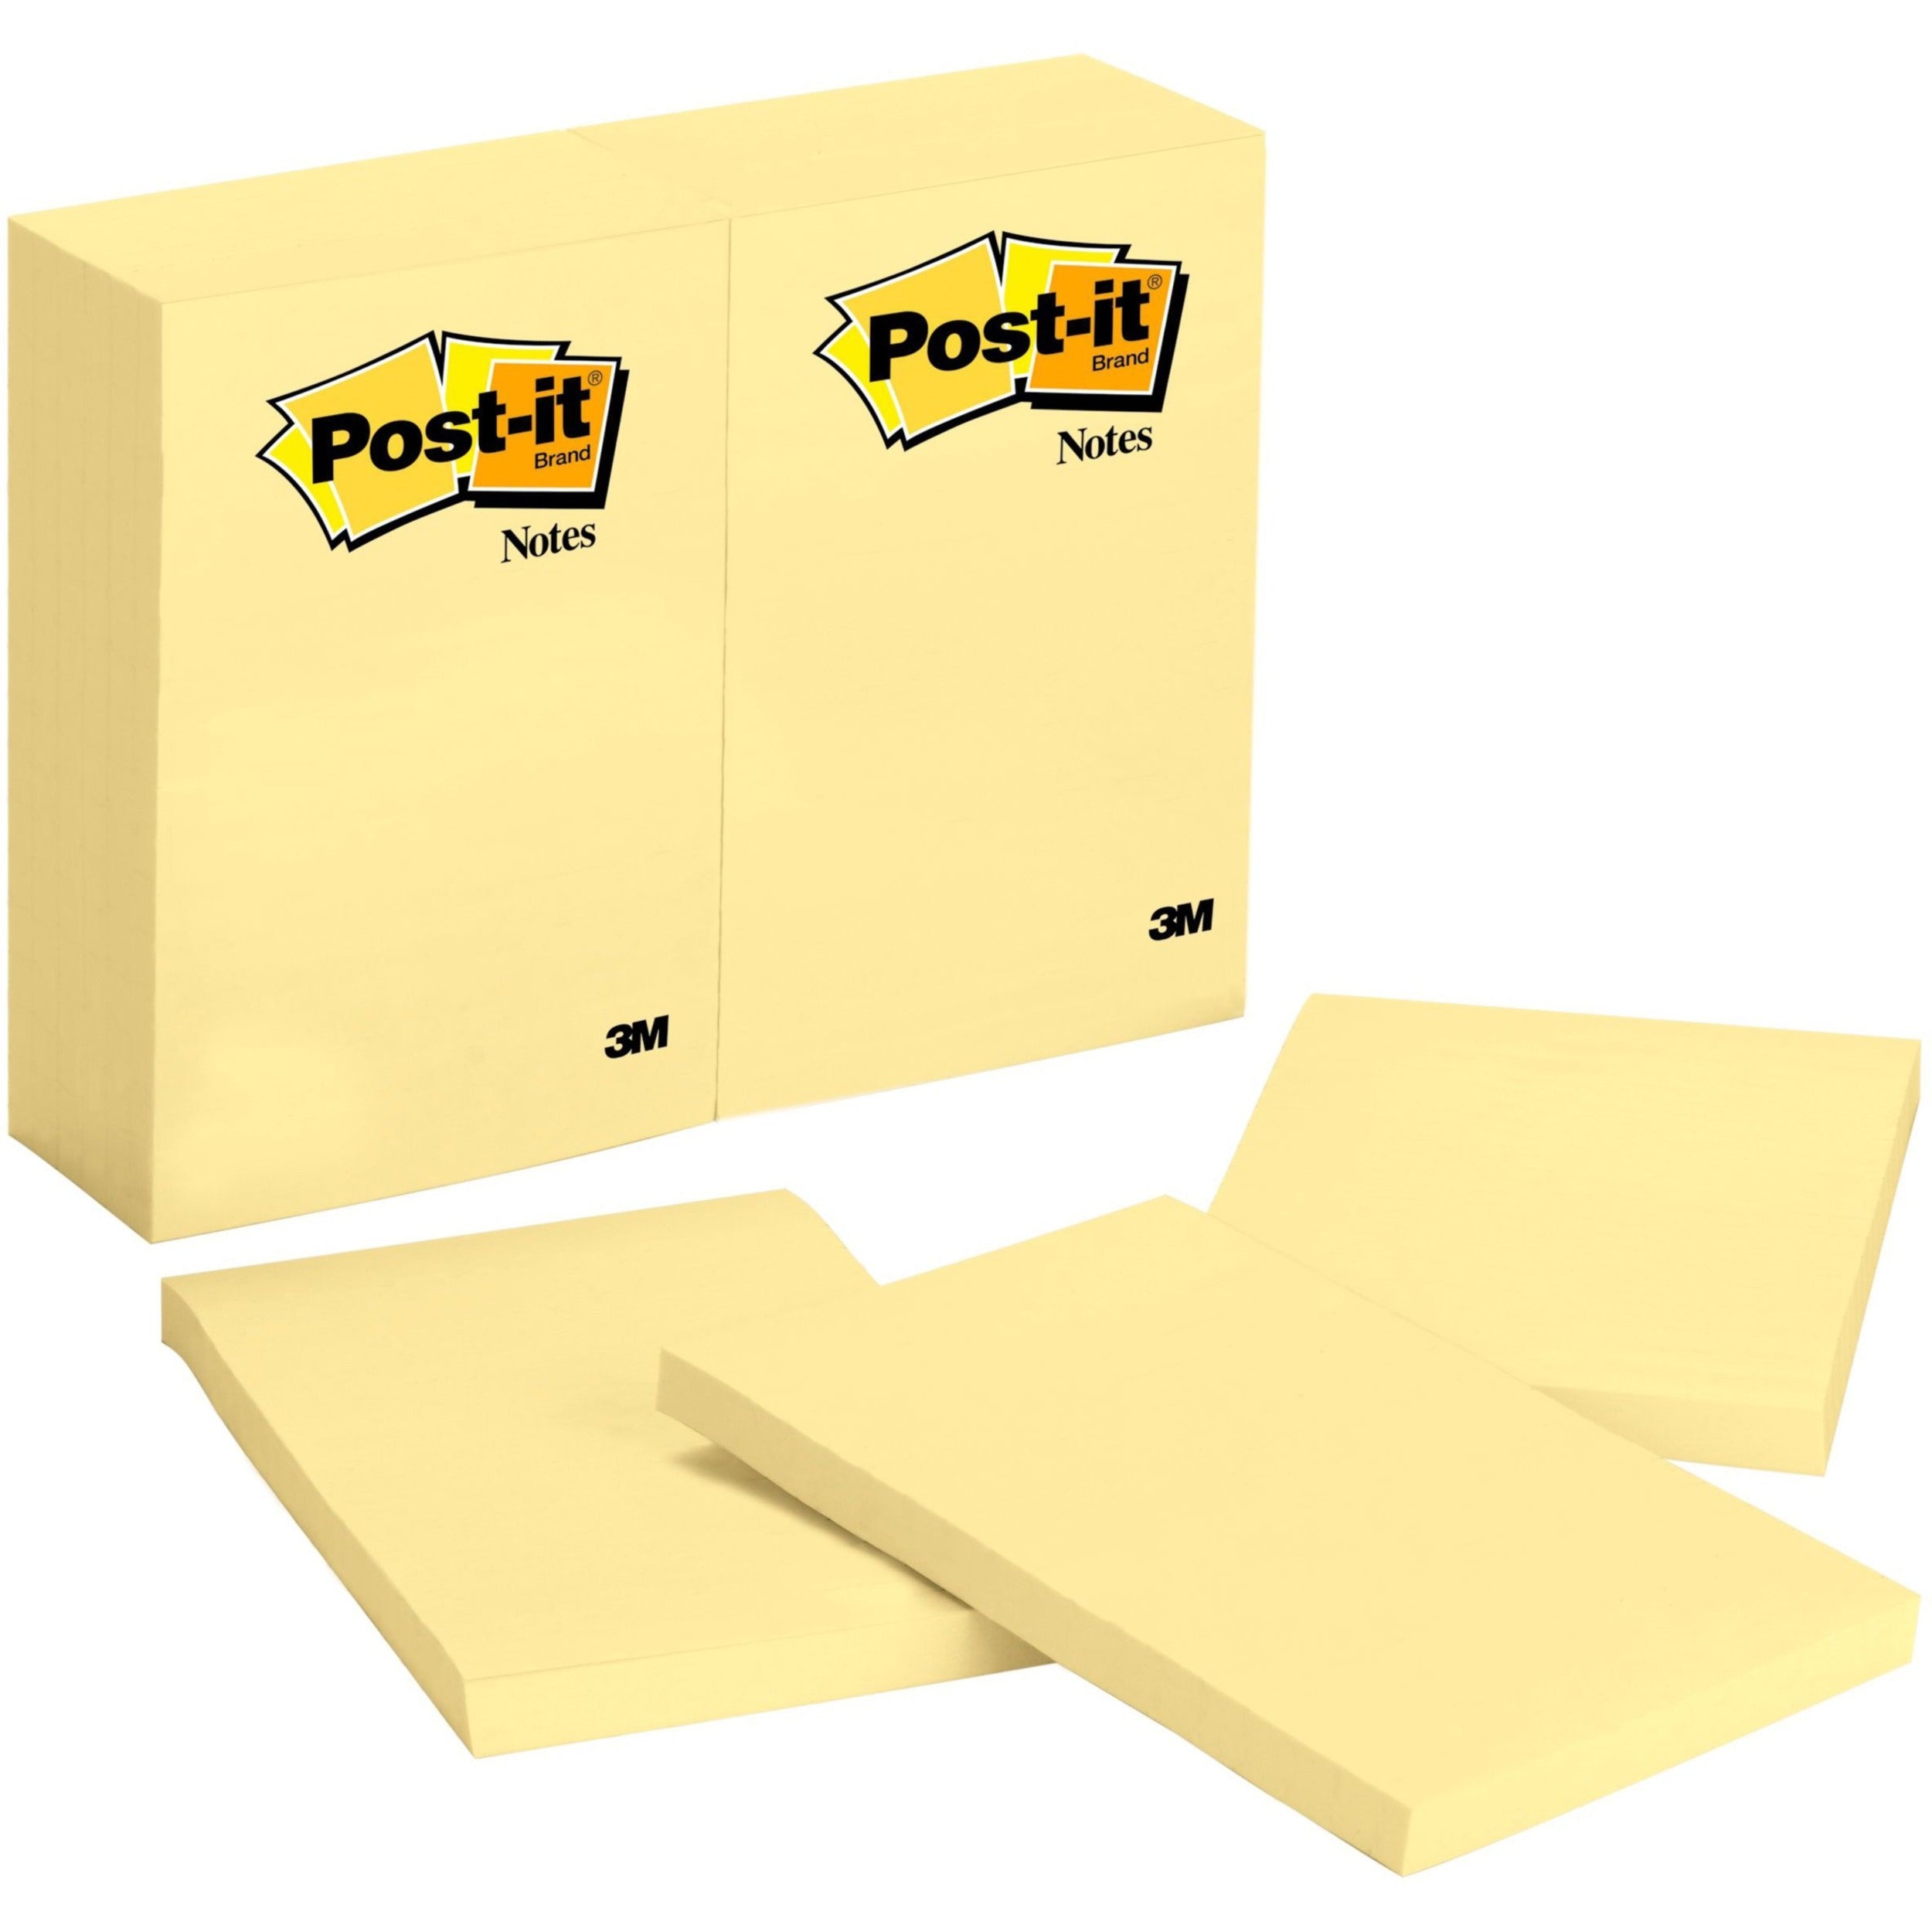 post-it-notes-original-notepads-4-x-6-rectangle-100-sheets-per-pad-unruled-canary-yellow-paper-self-adhesive-repositionable-24-bundle_mmm659ywbd - 1